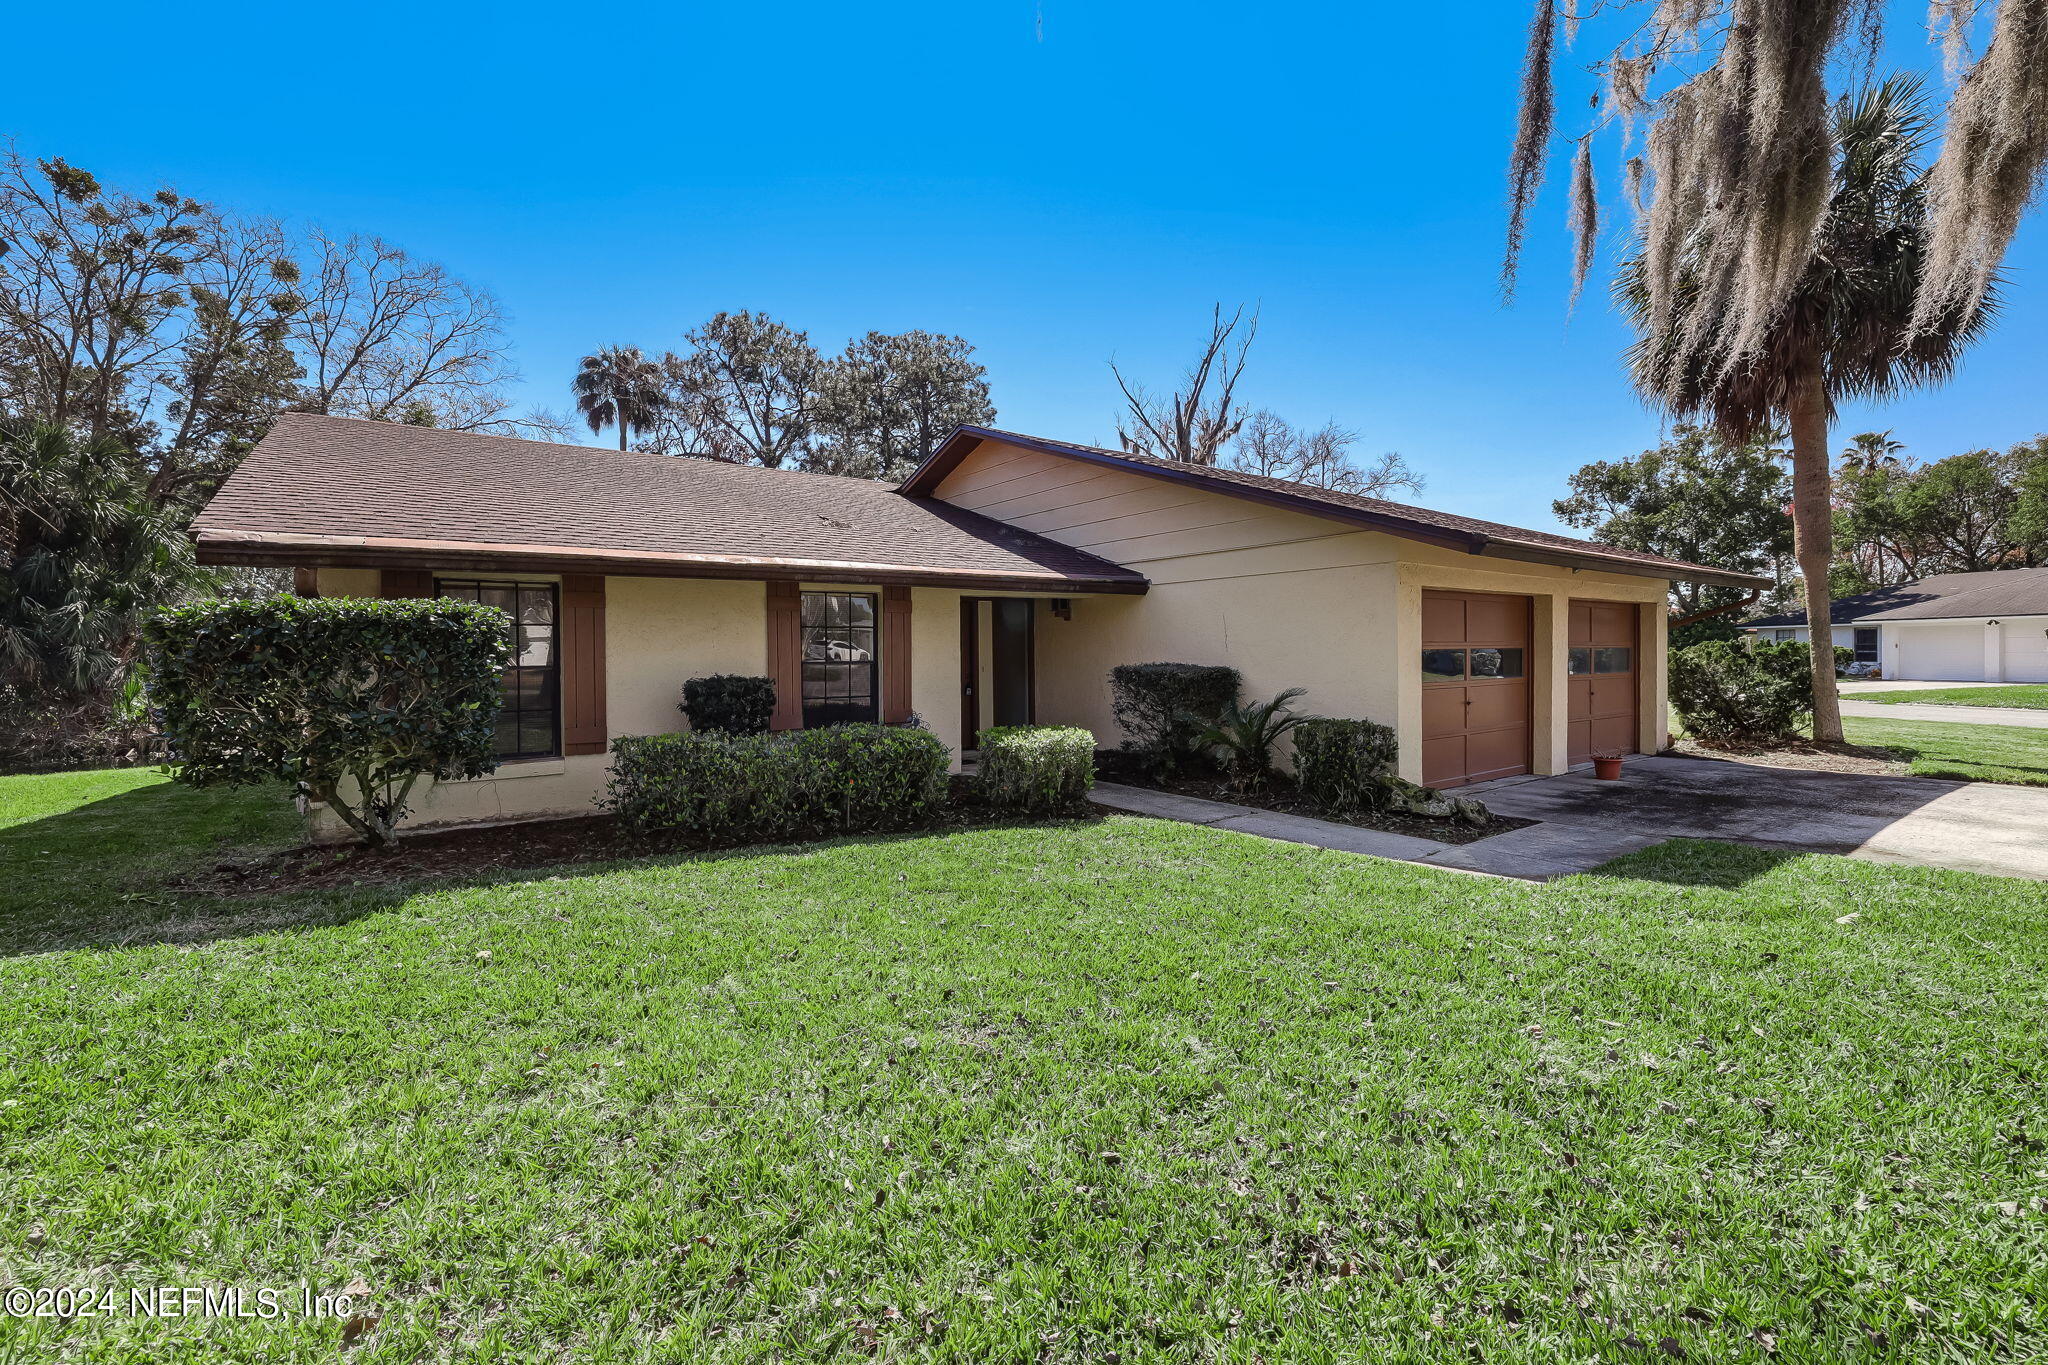 Ponte Vedra Beach, FL home for sale located at 621 MIRAMAR Lane, Ponte Vedra Beach, FL 32082